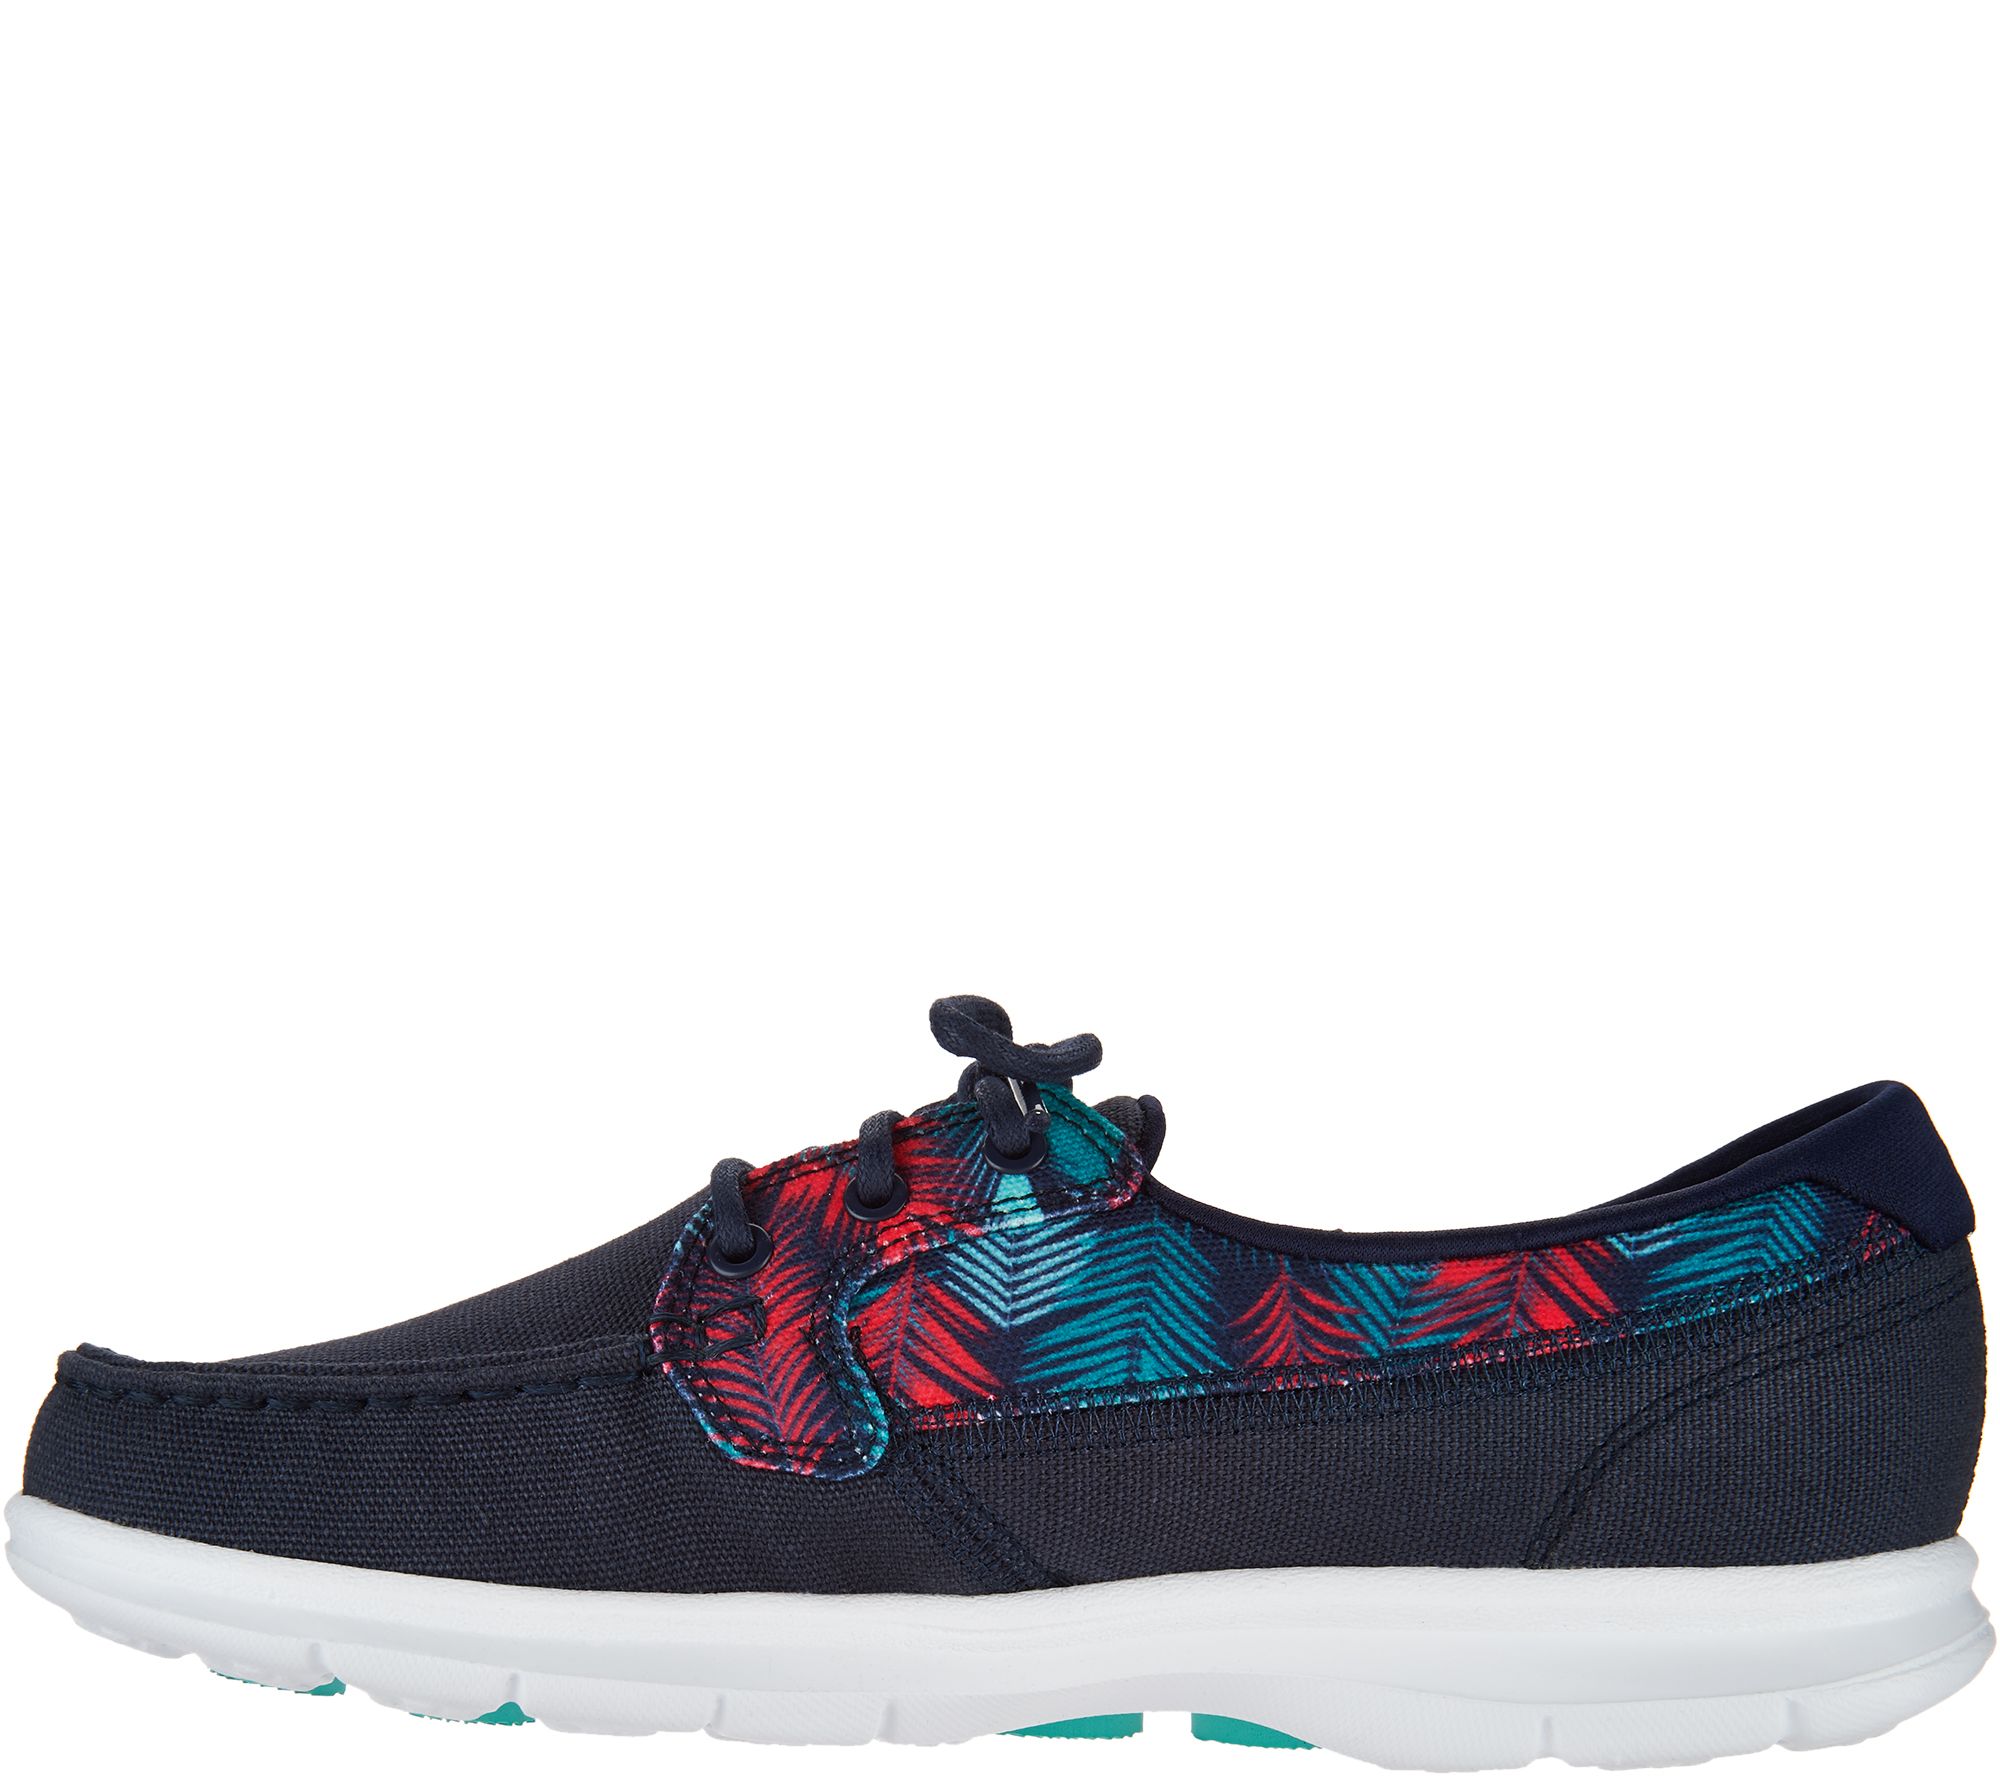 Skechers On-the-GO Printed Canvas Boat Shoes - Cabana - QVC.com